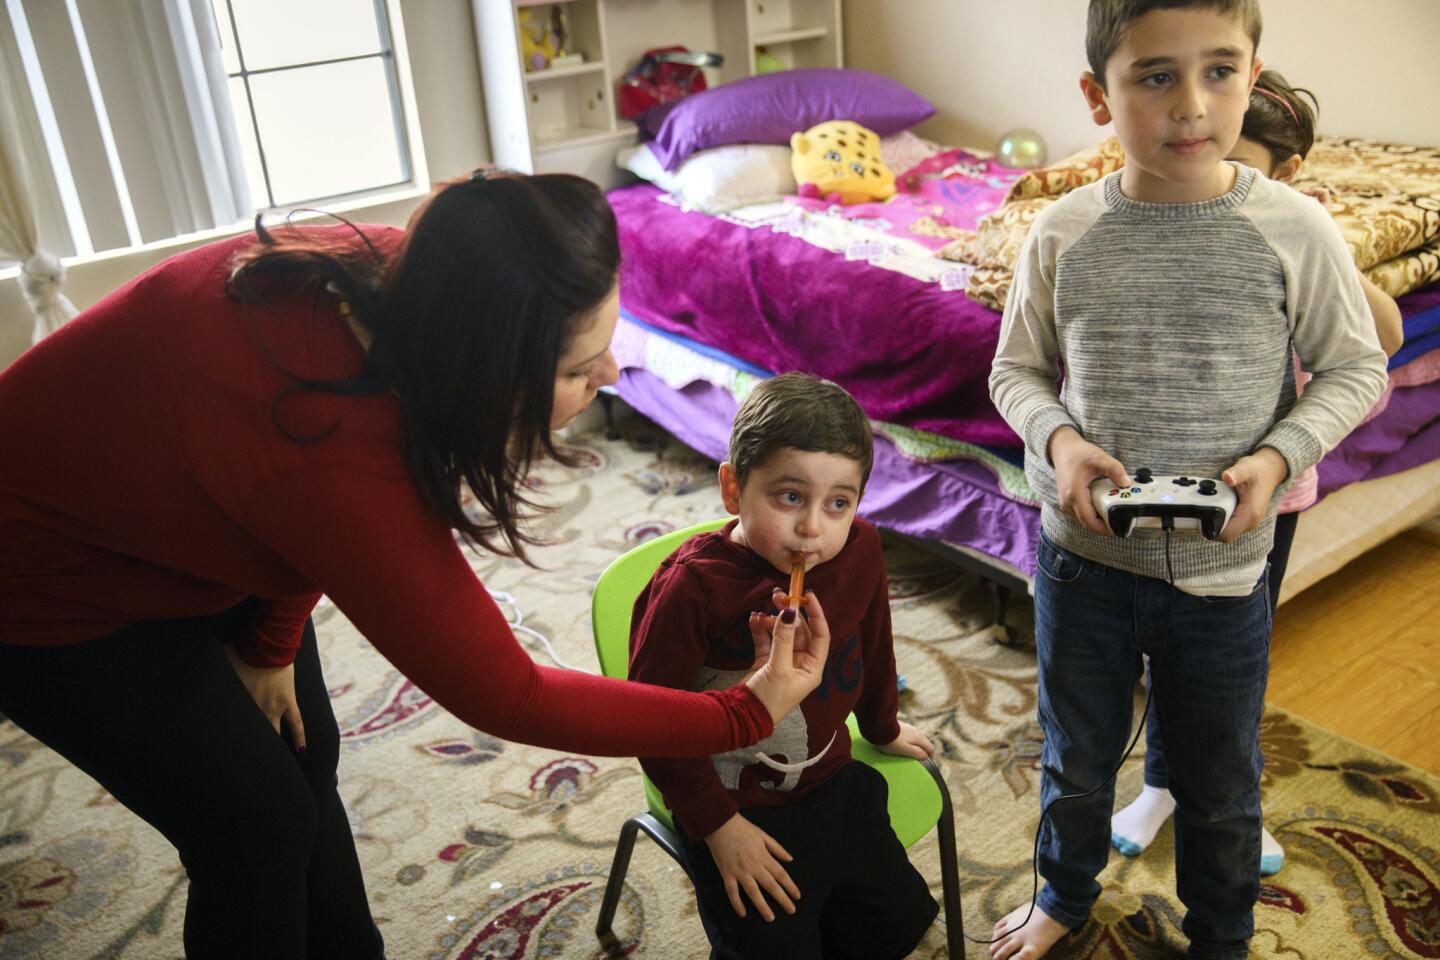 Syrian is separated from his parents